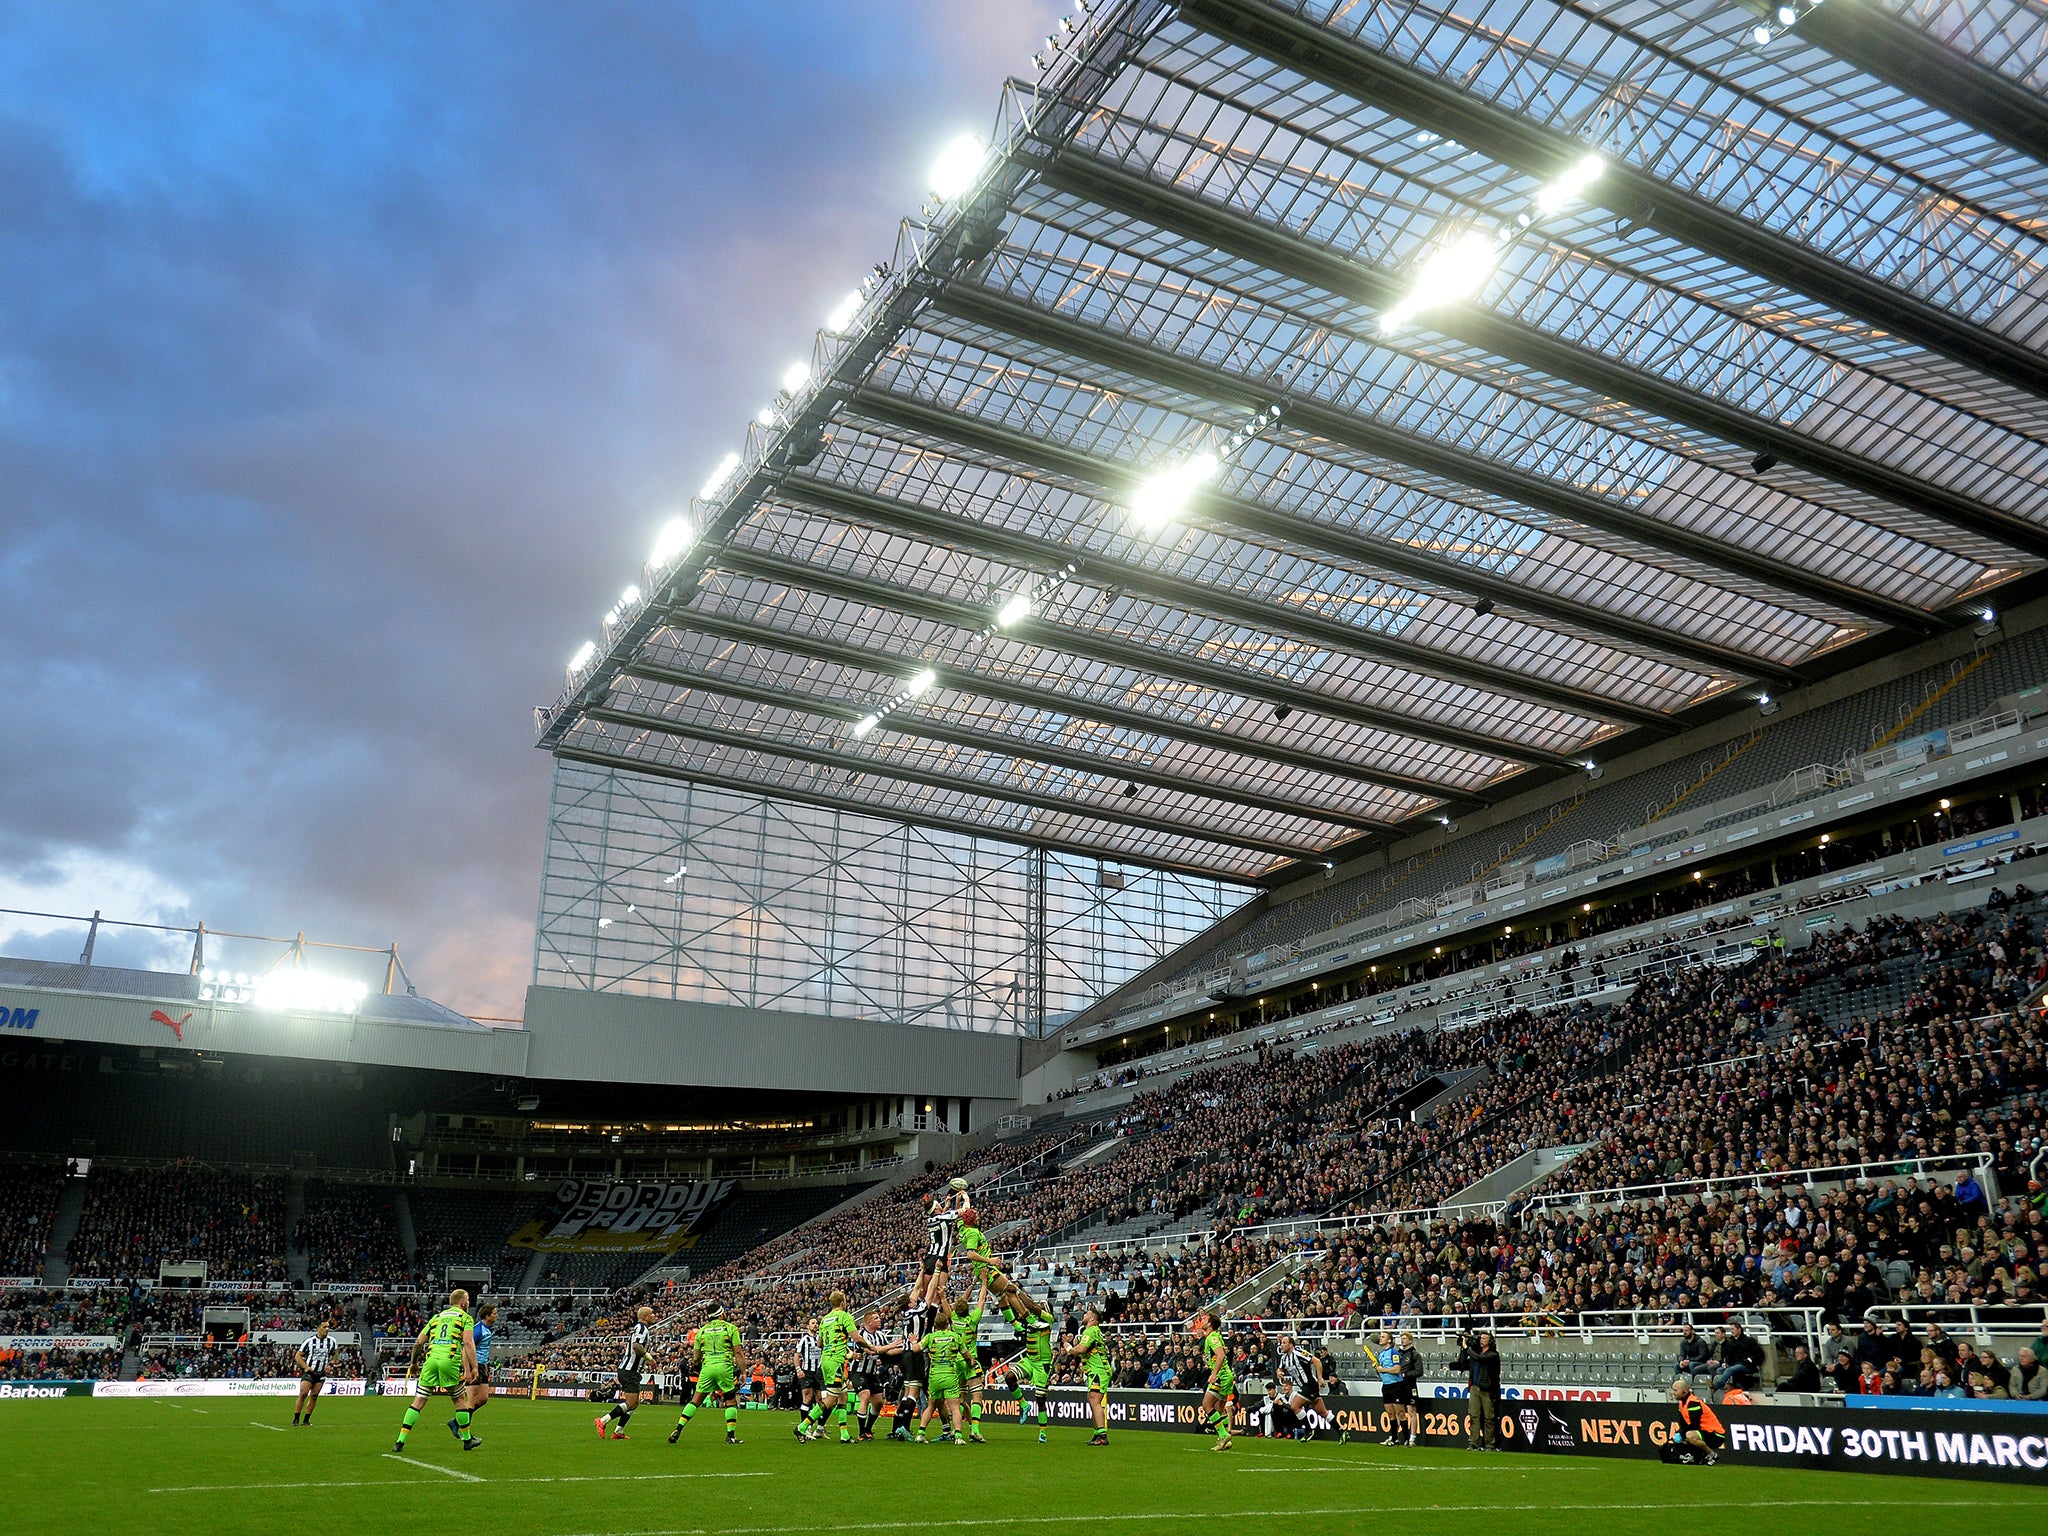 30,174 fans watched the match to set a new record for a Newcastle home attendance